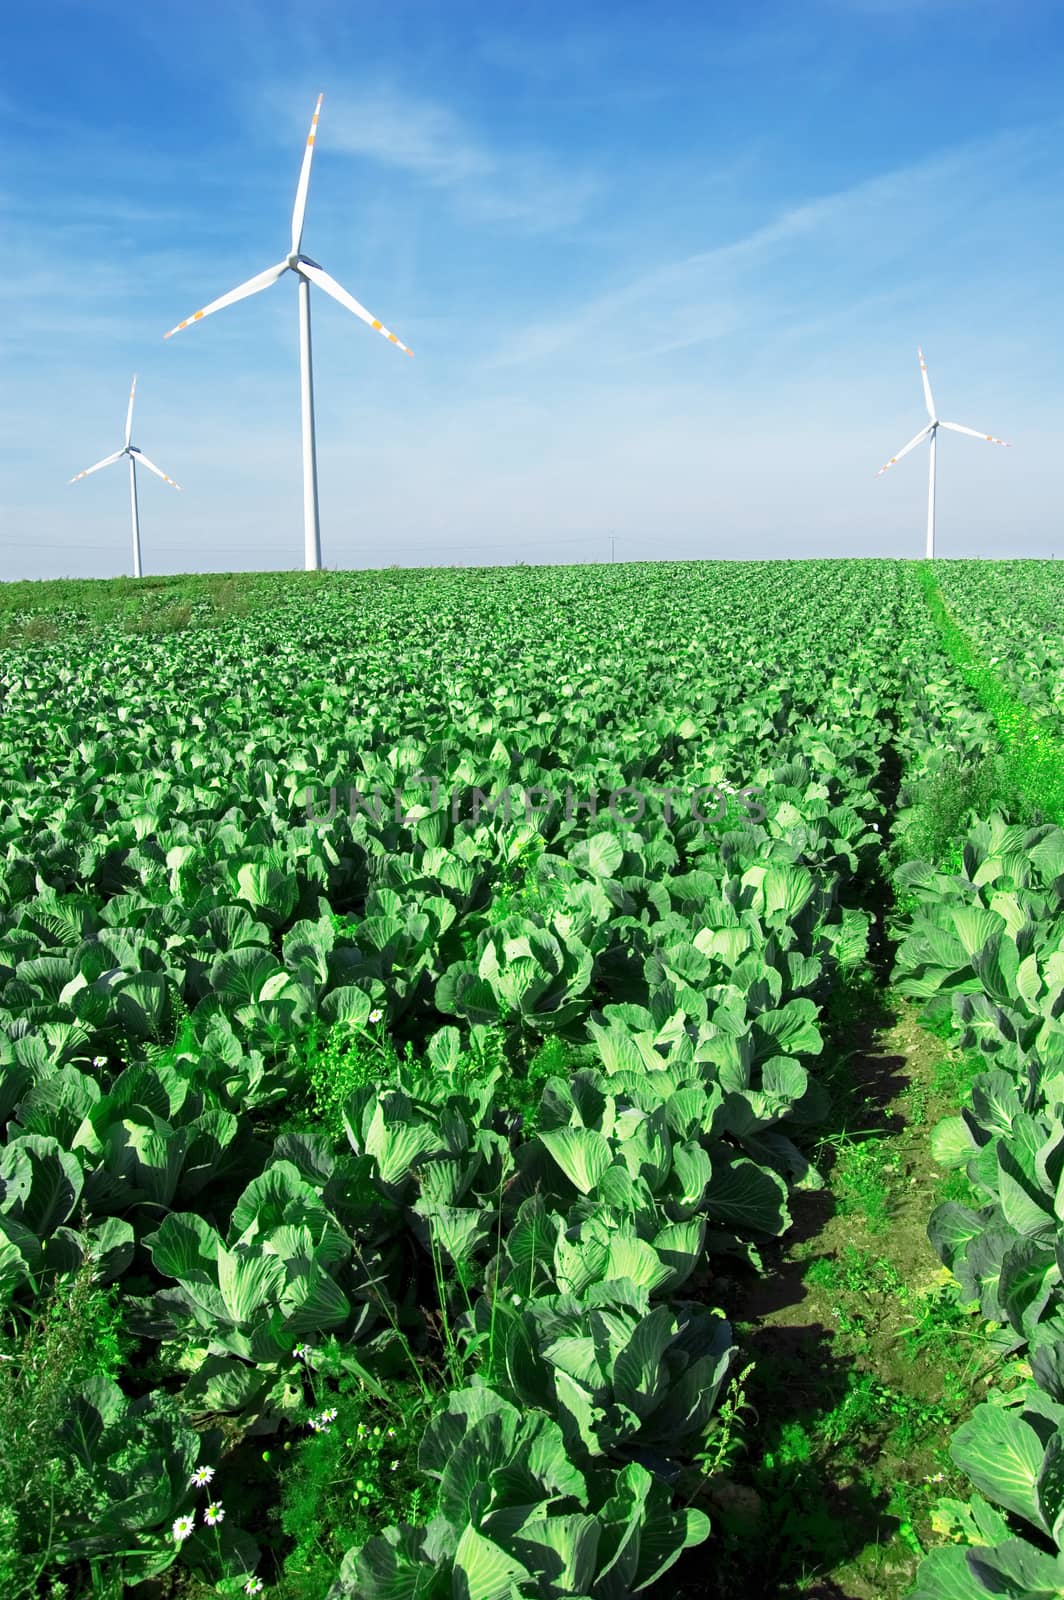 Energy conceptual image. Windmills on cabbage field.